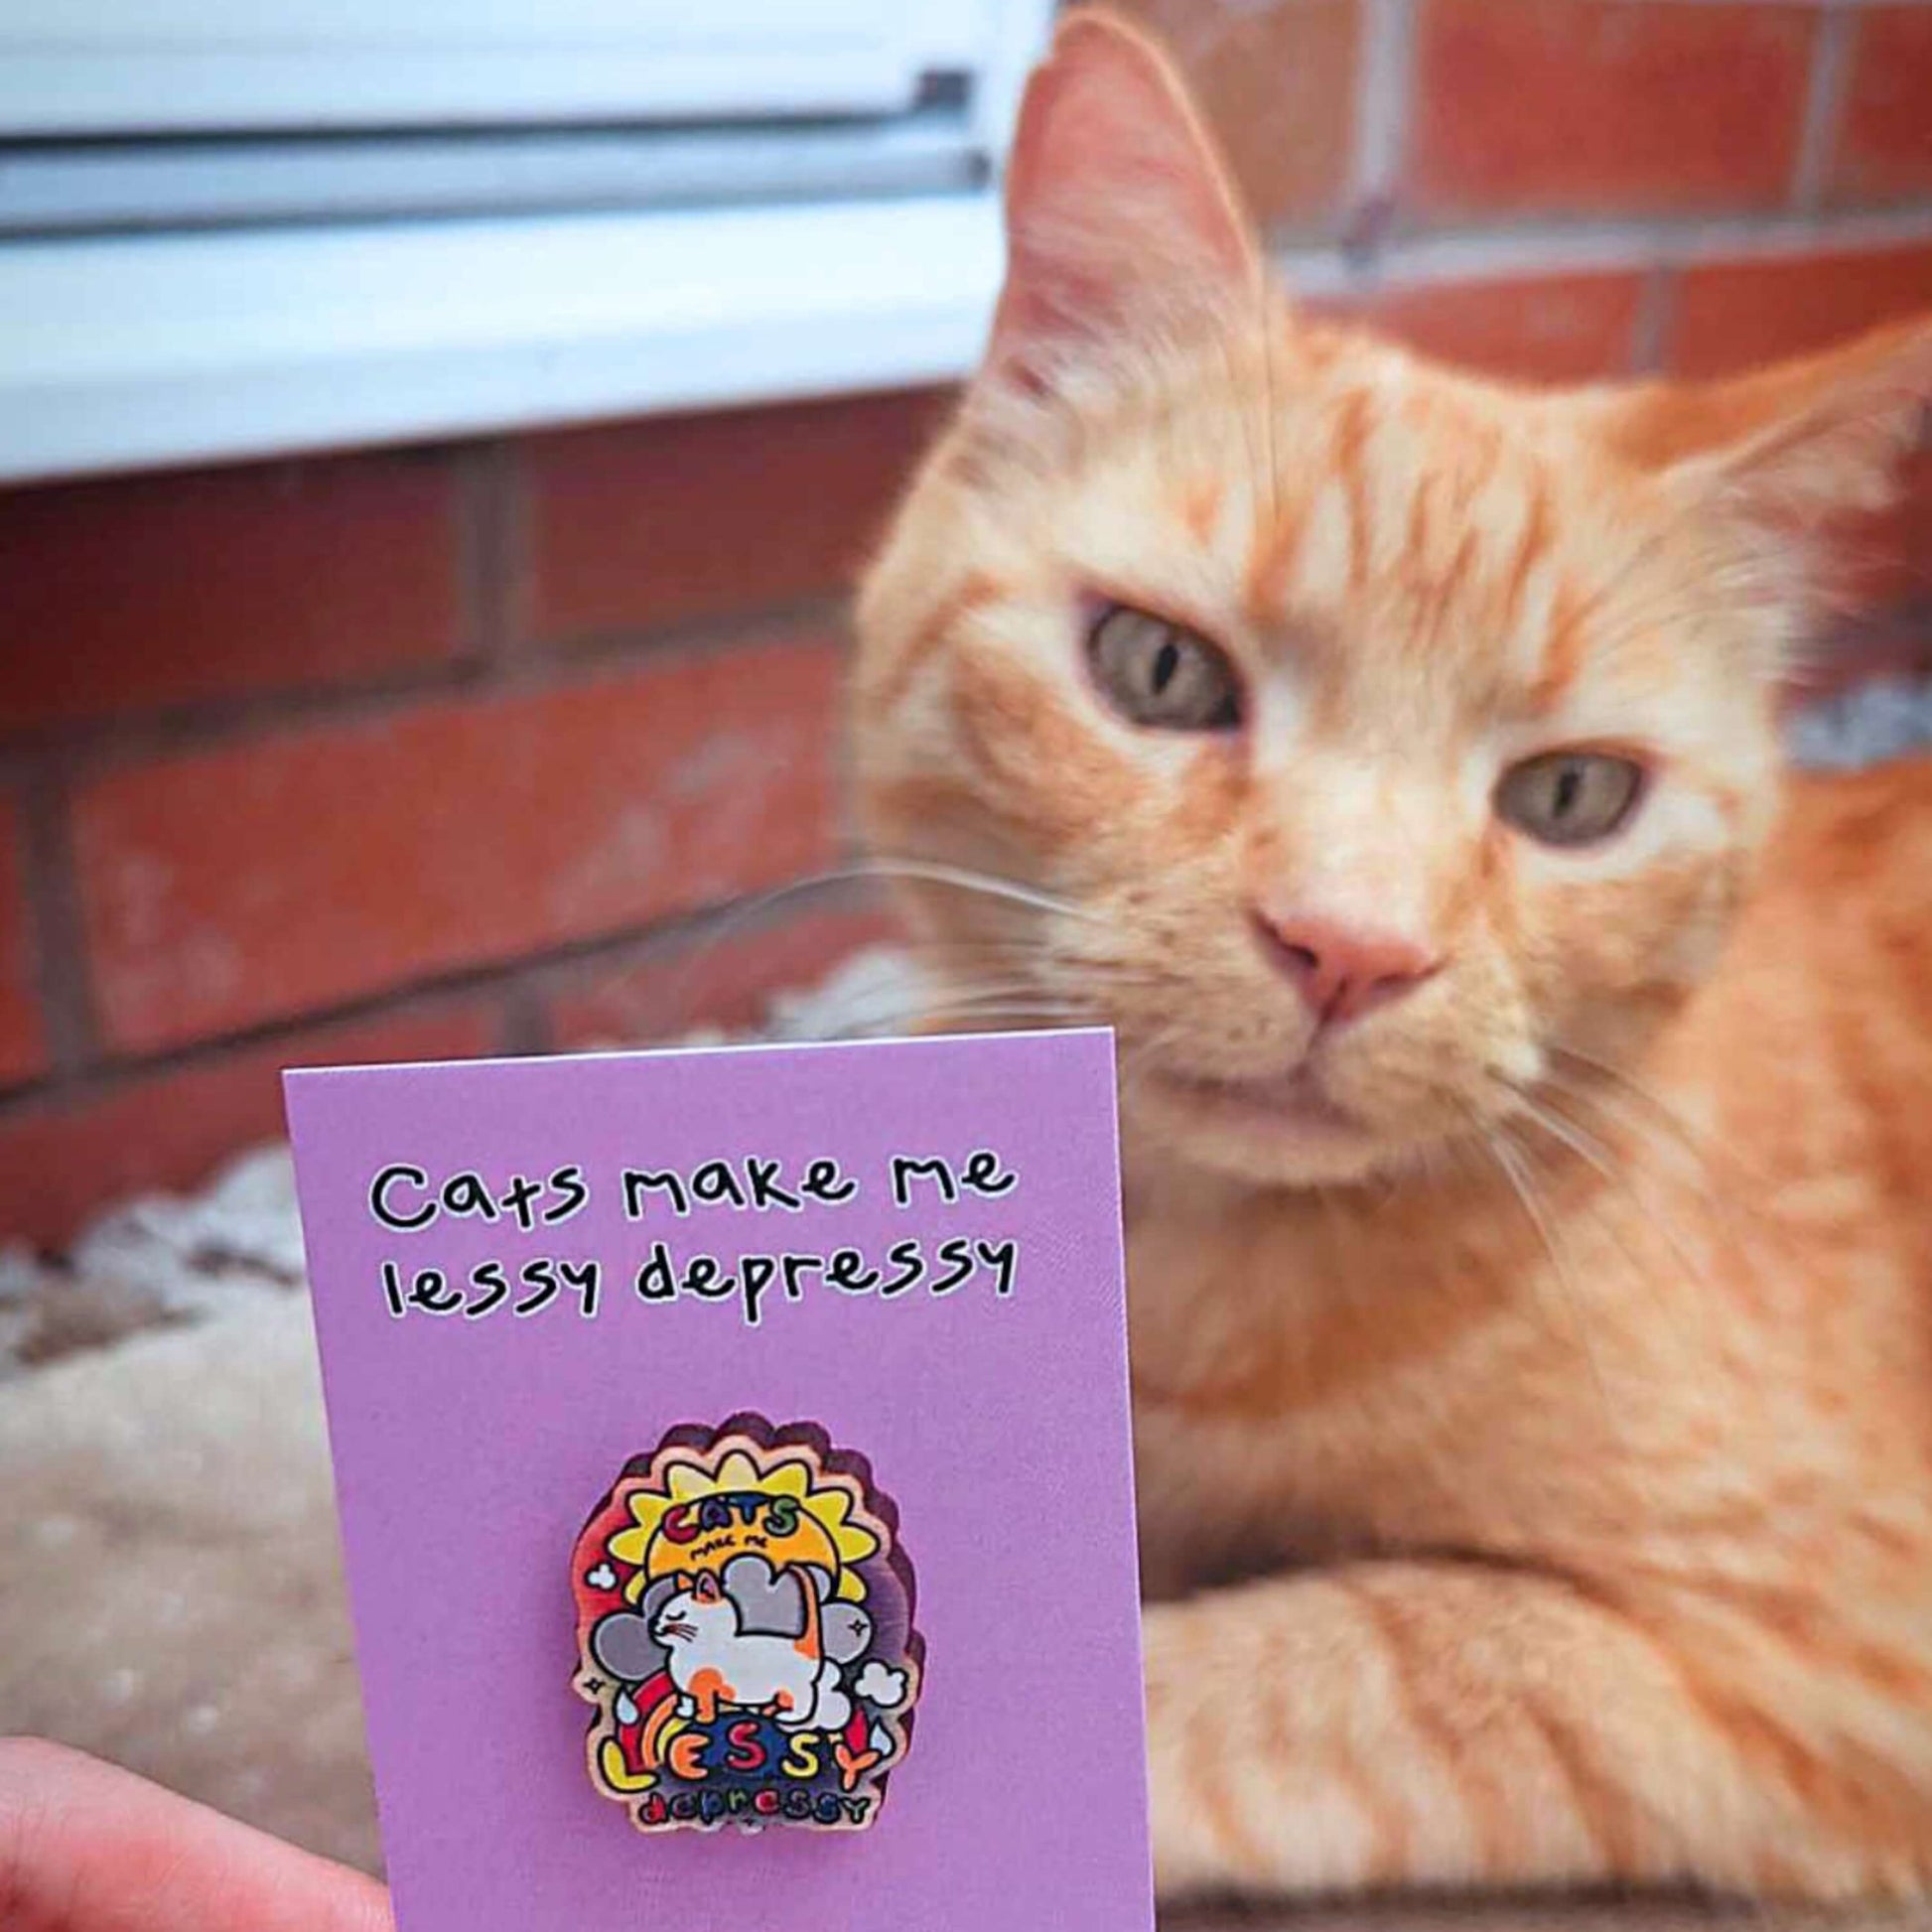 The Cats Make Me Lessy Depressy Wooden Pin Badge on pink backing card being held next to an orange cat looking to camera. The wooden pin features a smiling orange and white cat with a sunshine, raincloud and rainbow, in rainbow text across this reads 'cats make me lessy depressy'. Hand drawn design to raise awareness for mental health and depression.